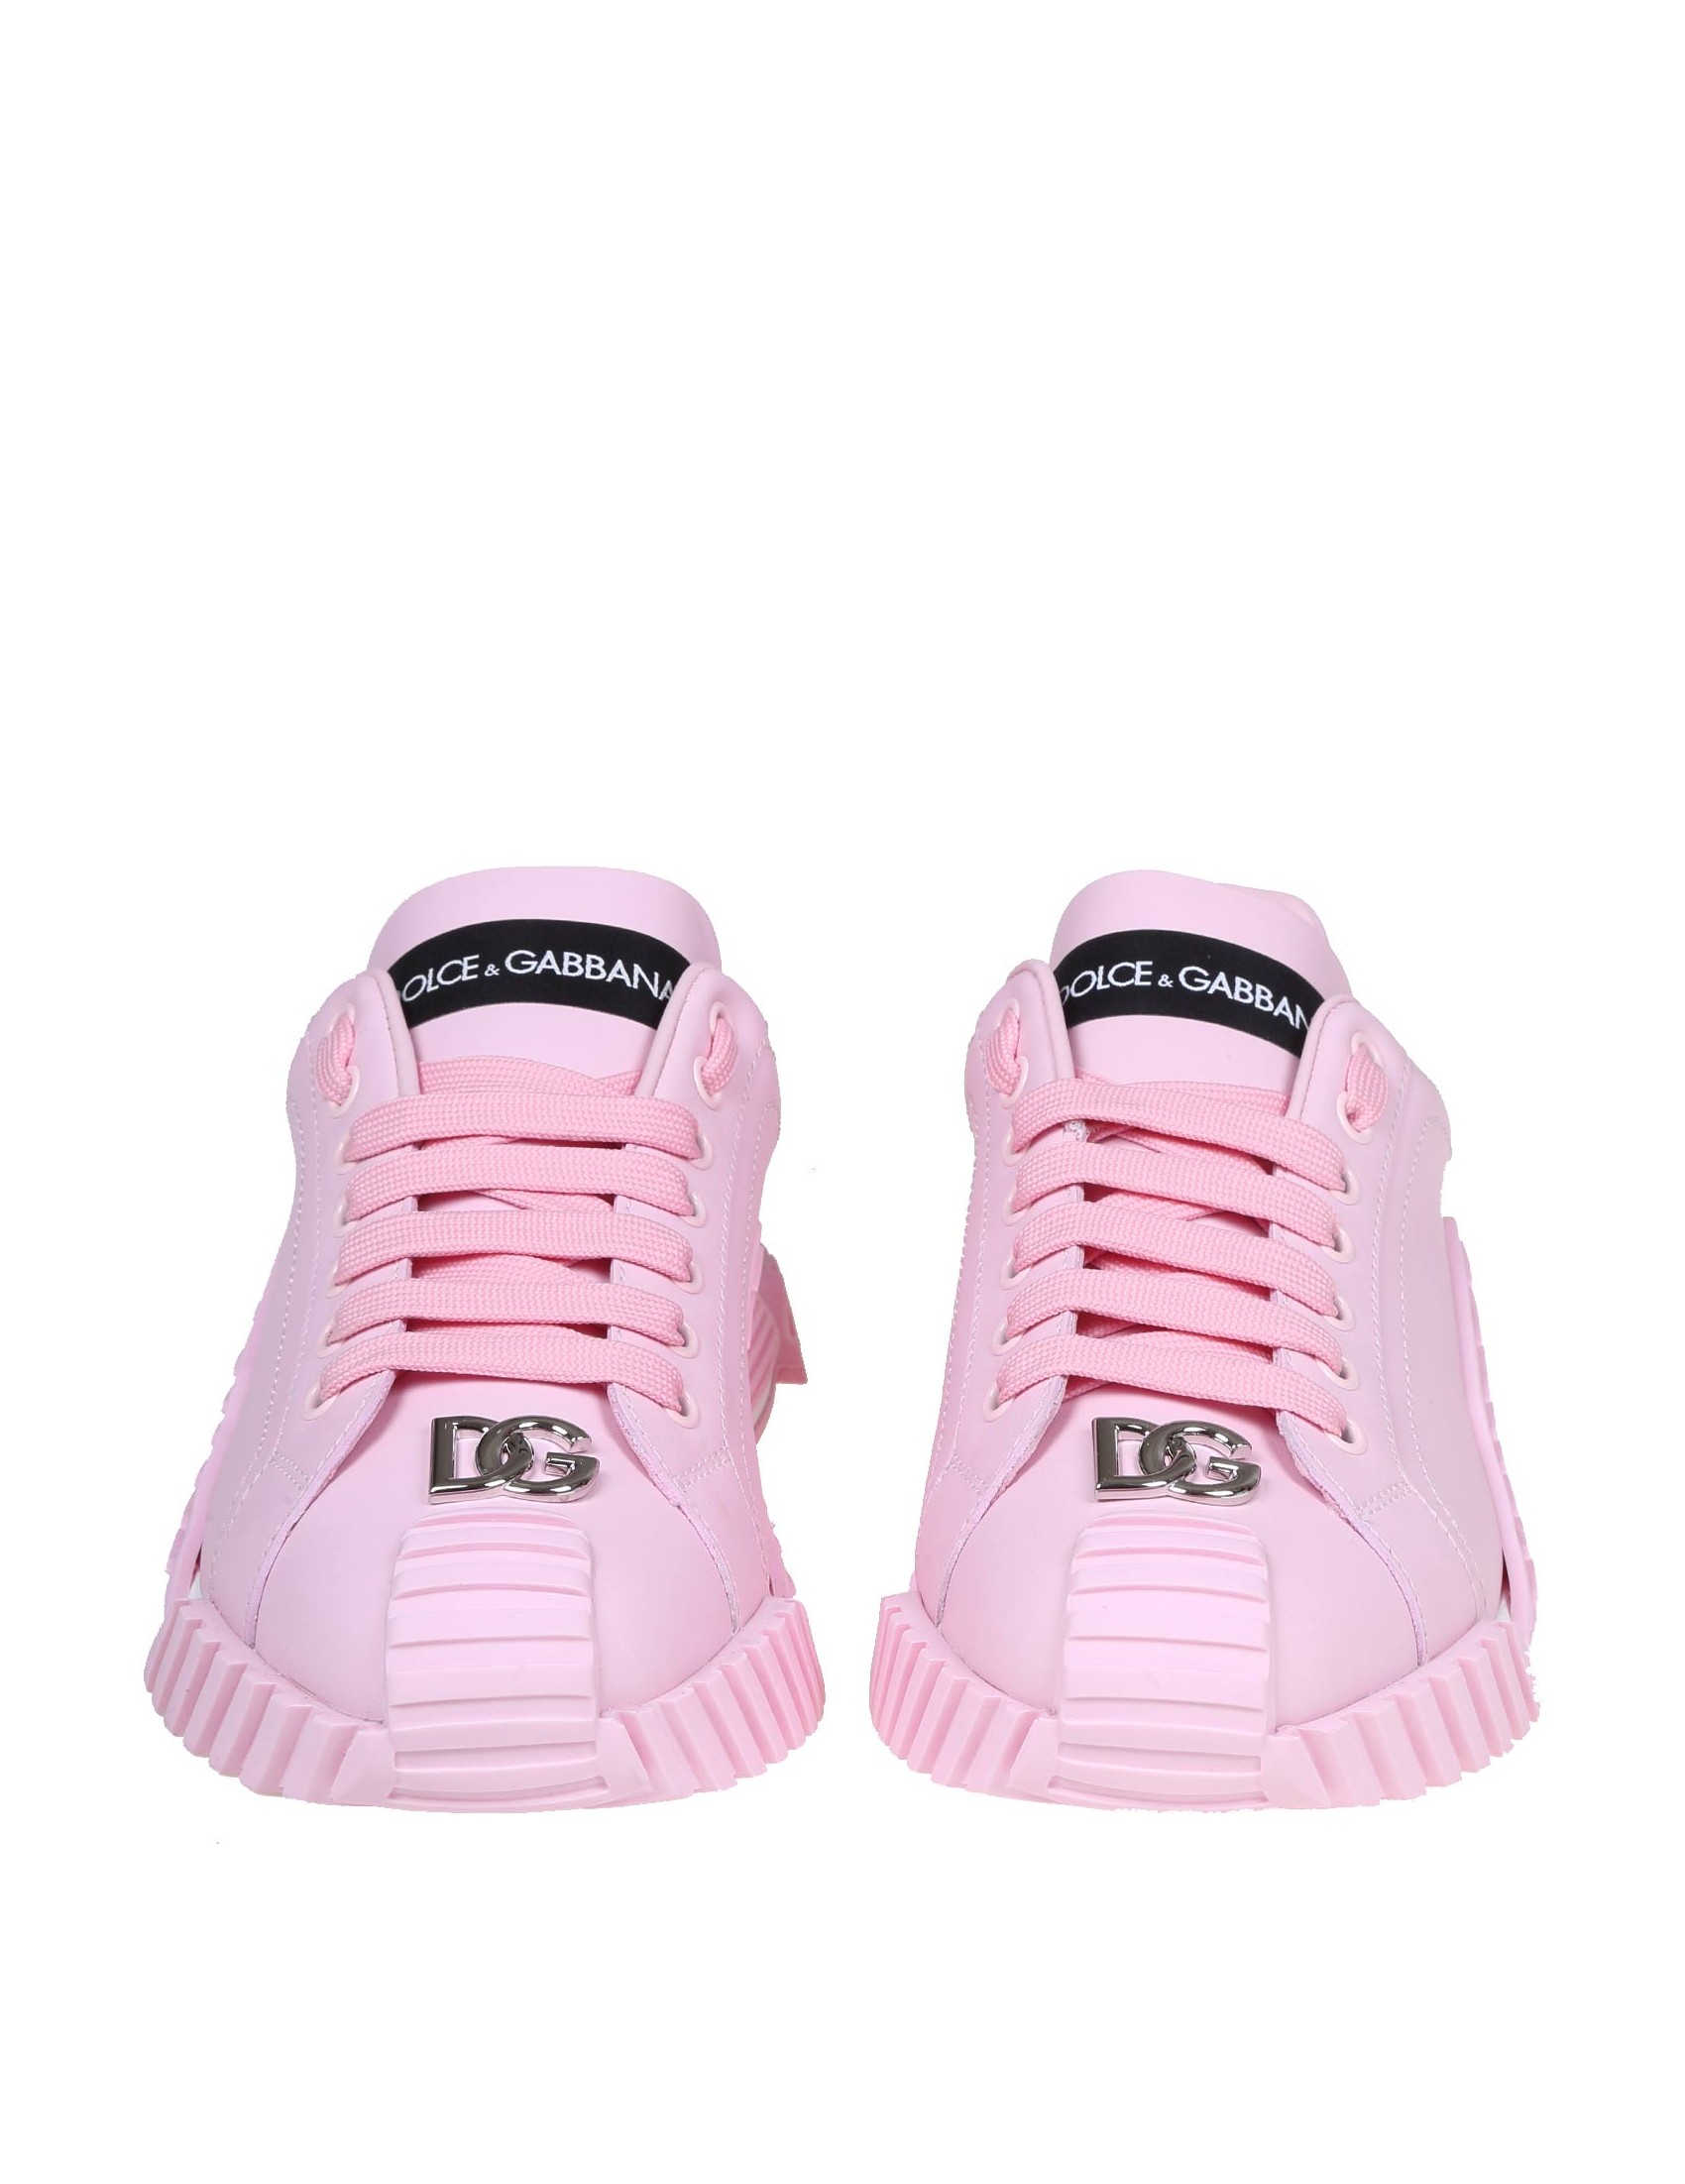 DOLCE GABBANA SNEAKERS PINK COLOR LEATHER